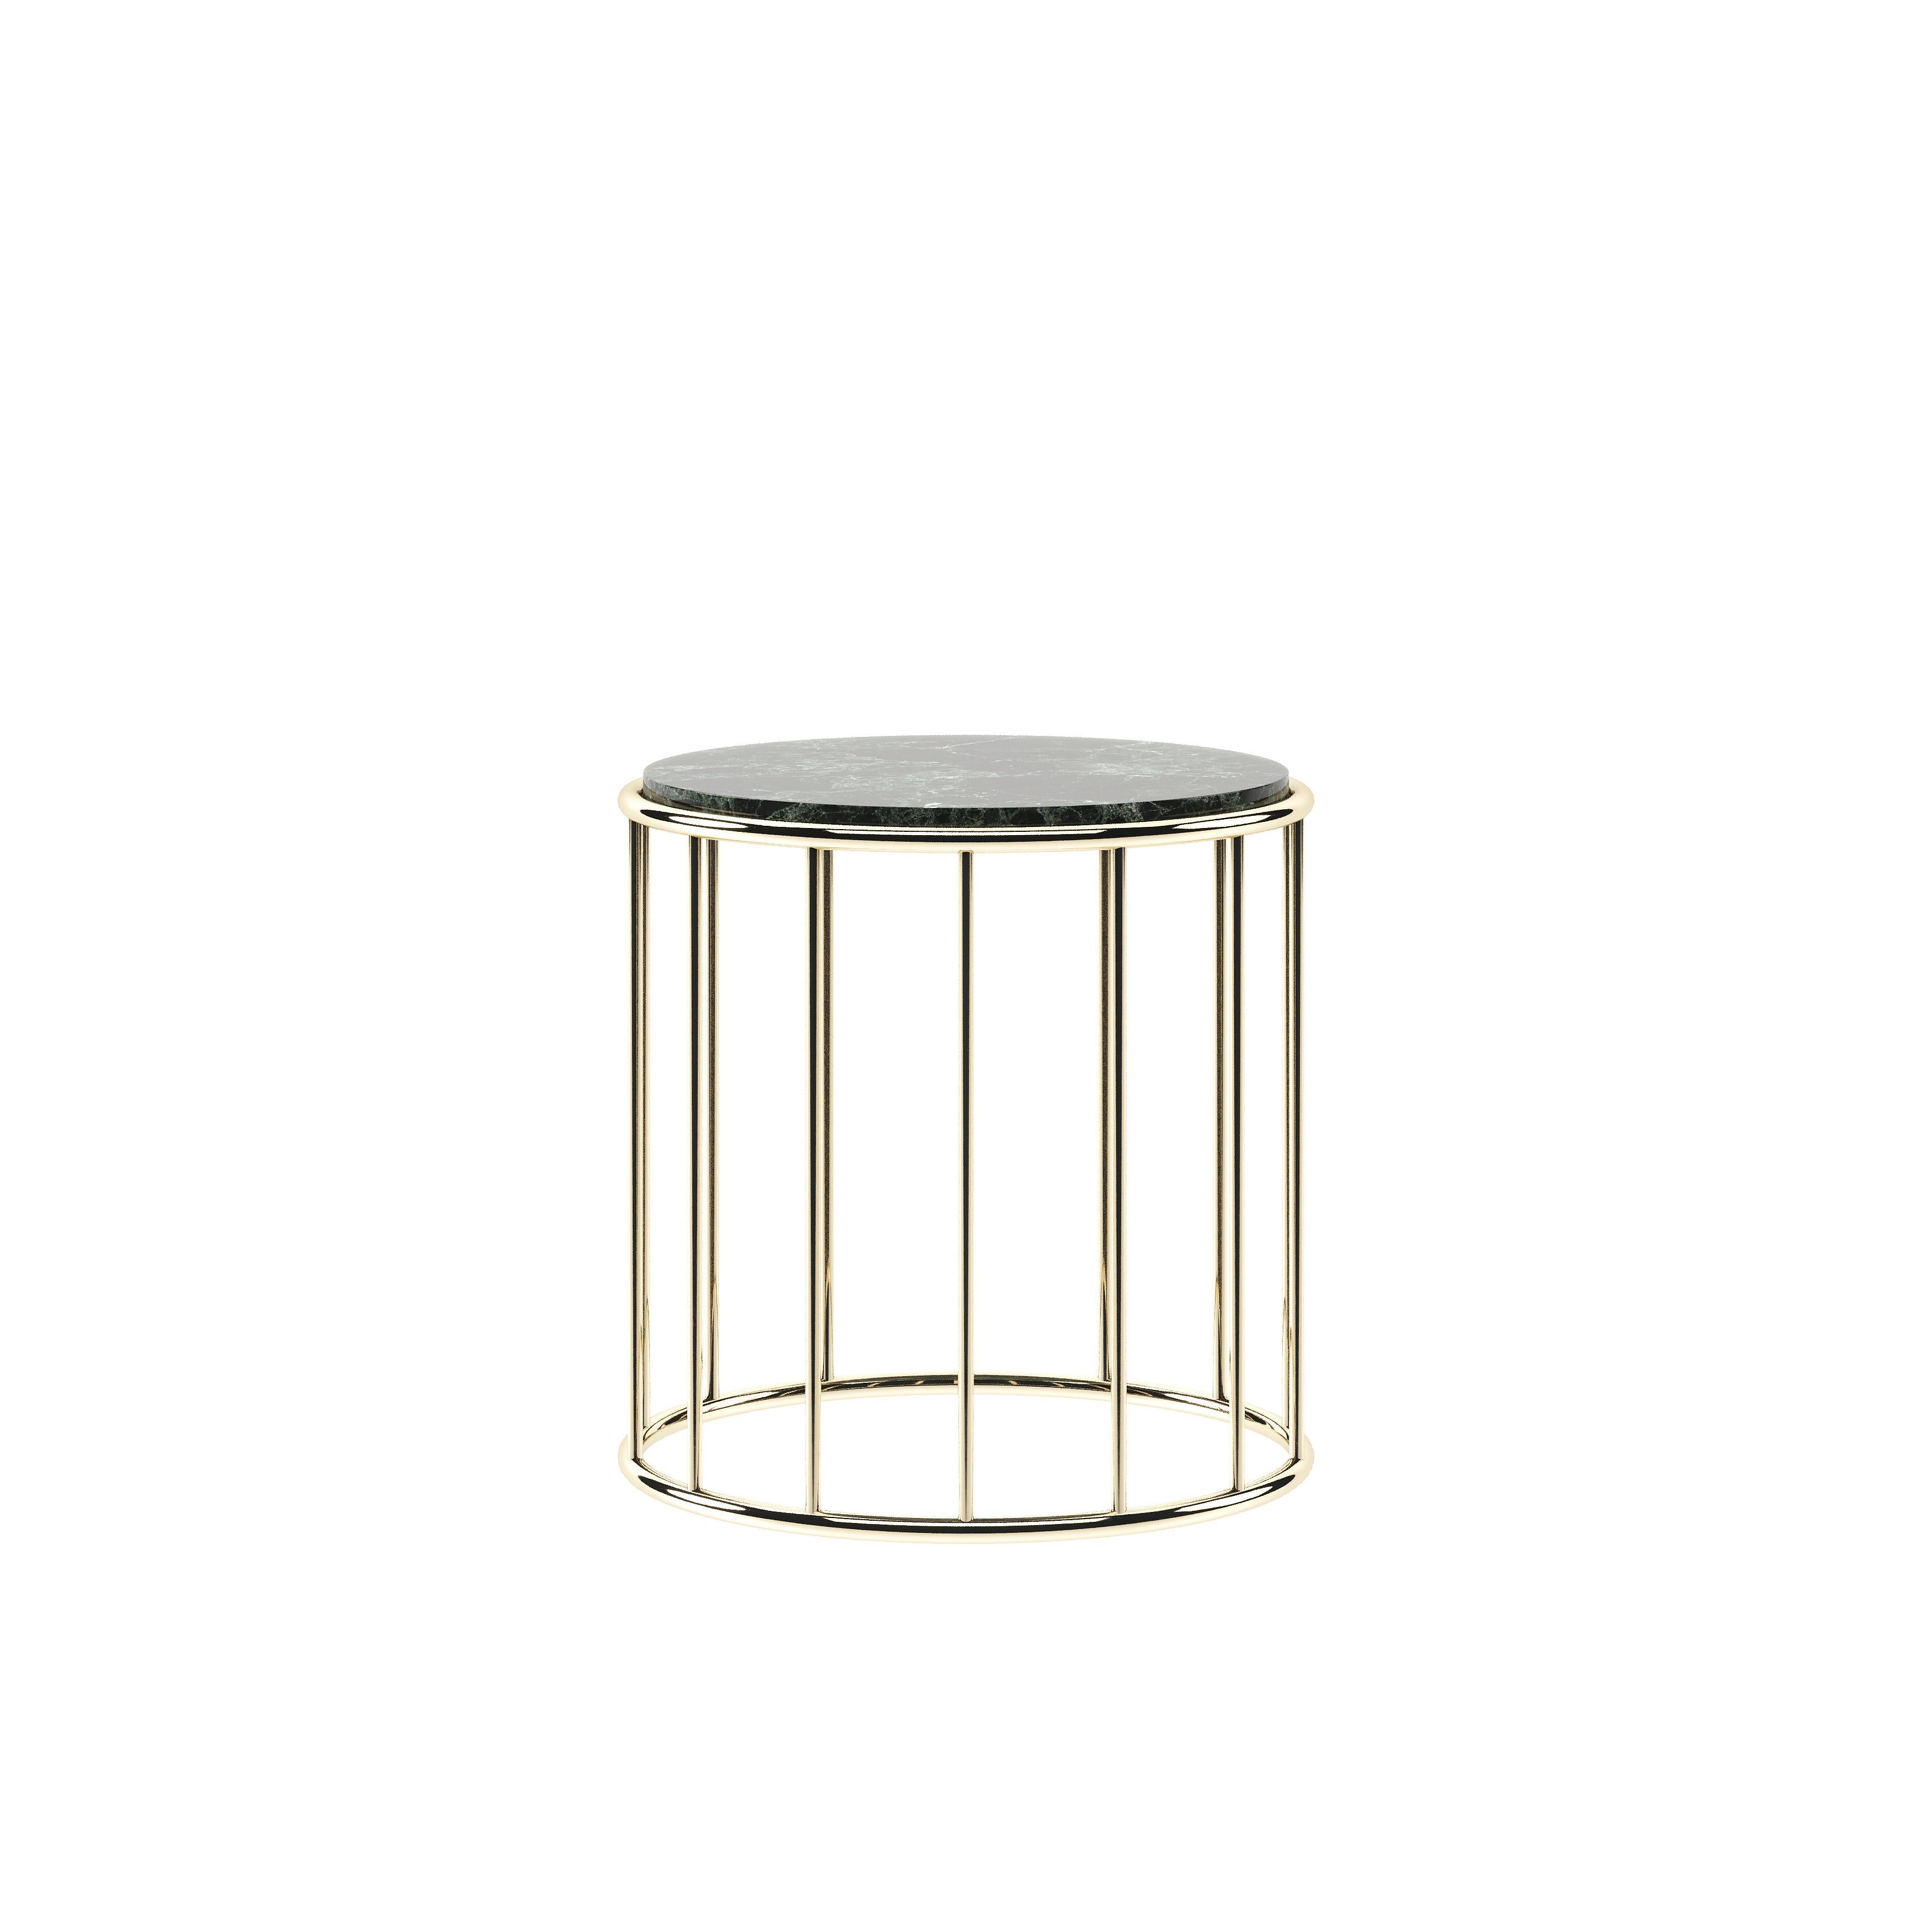 Make a statement with the still side table. With a marble top and a metal structure, Still is a strong character cocktail table for bold specs. An outstanding creation for functional dining rooms with geometric shapes.

* Available in different